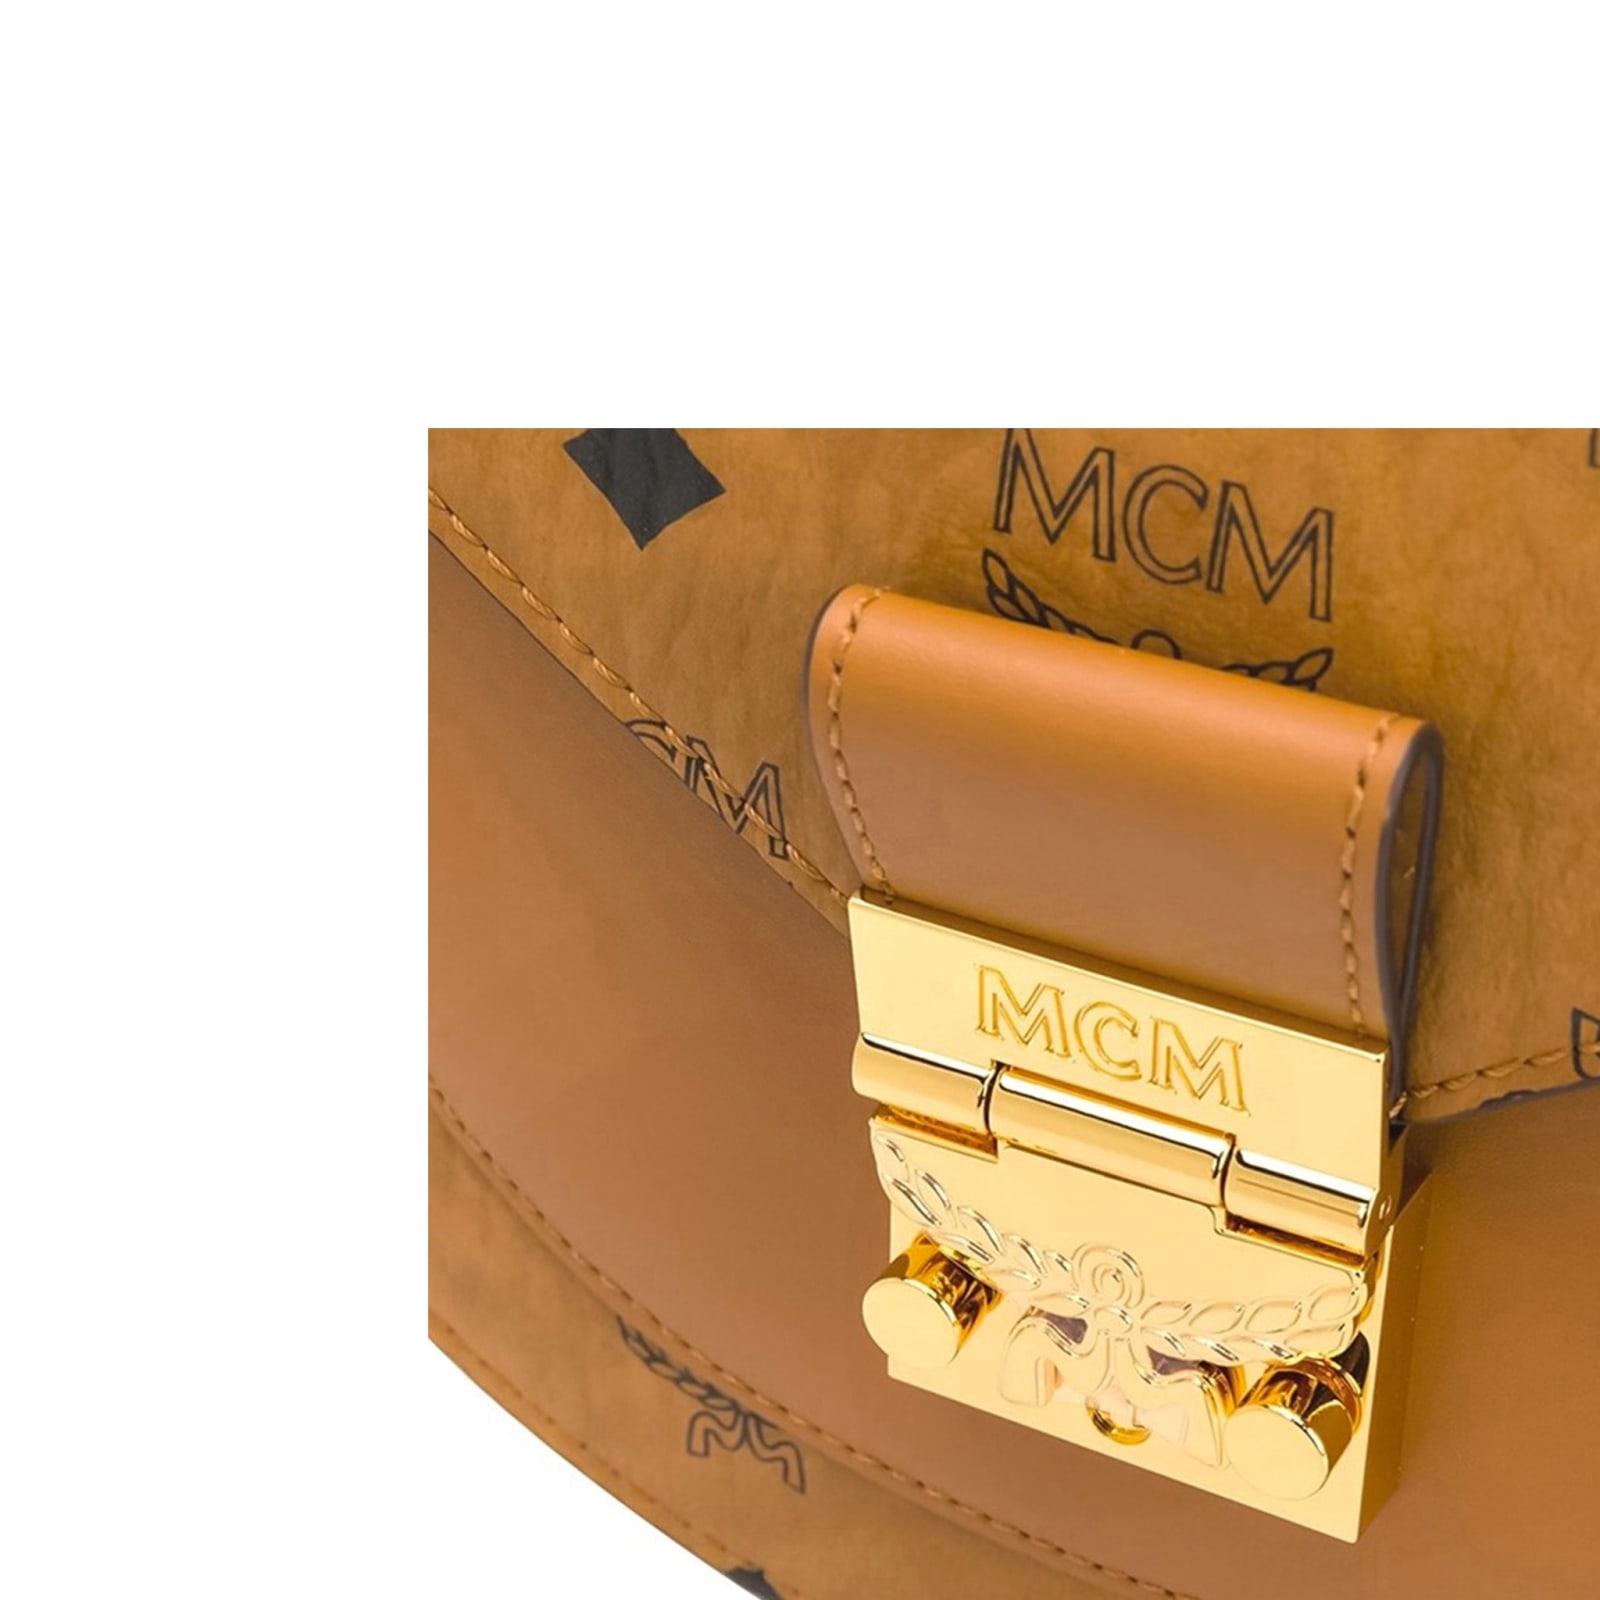 Mcm Logo Leather Shoulder Bag - Realry: Your Fashion Search Engine